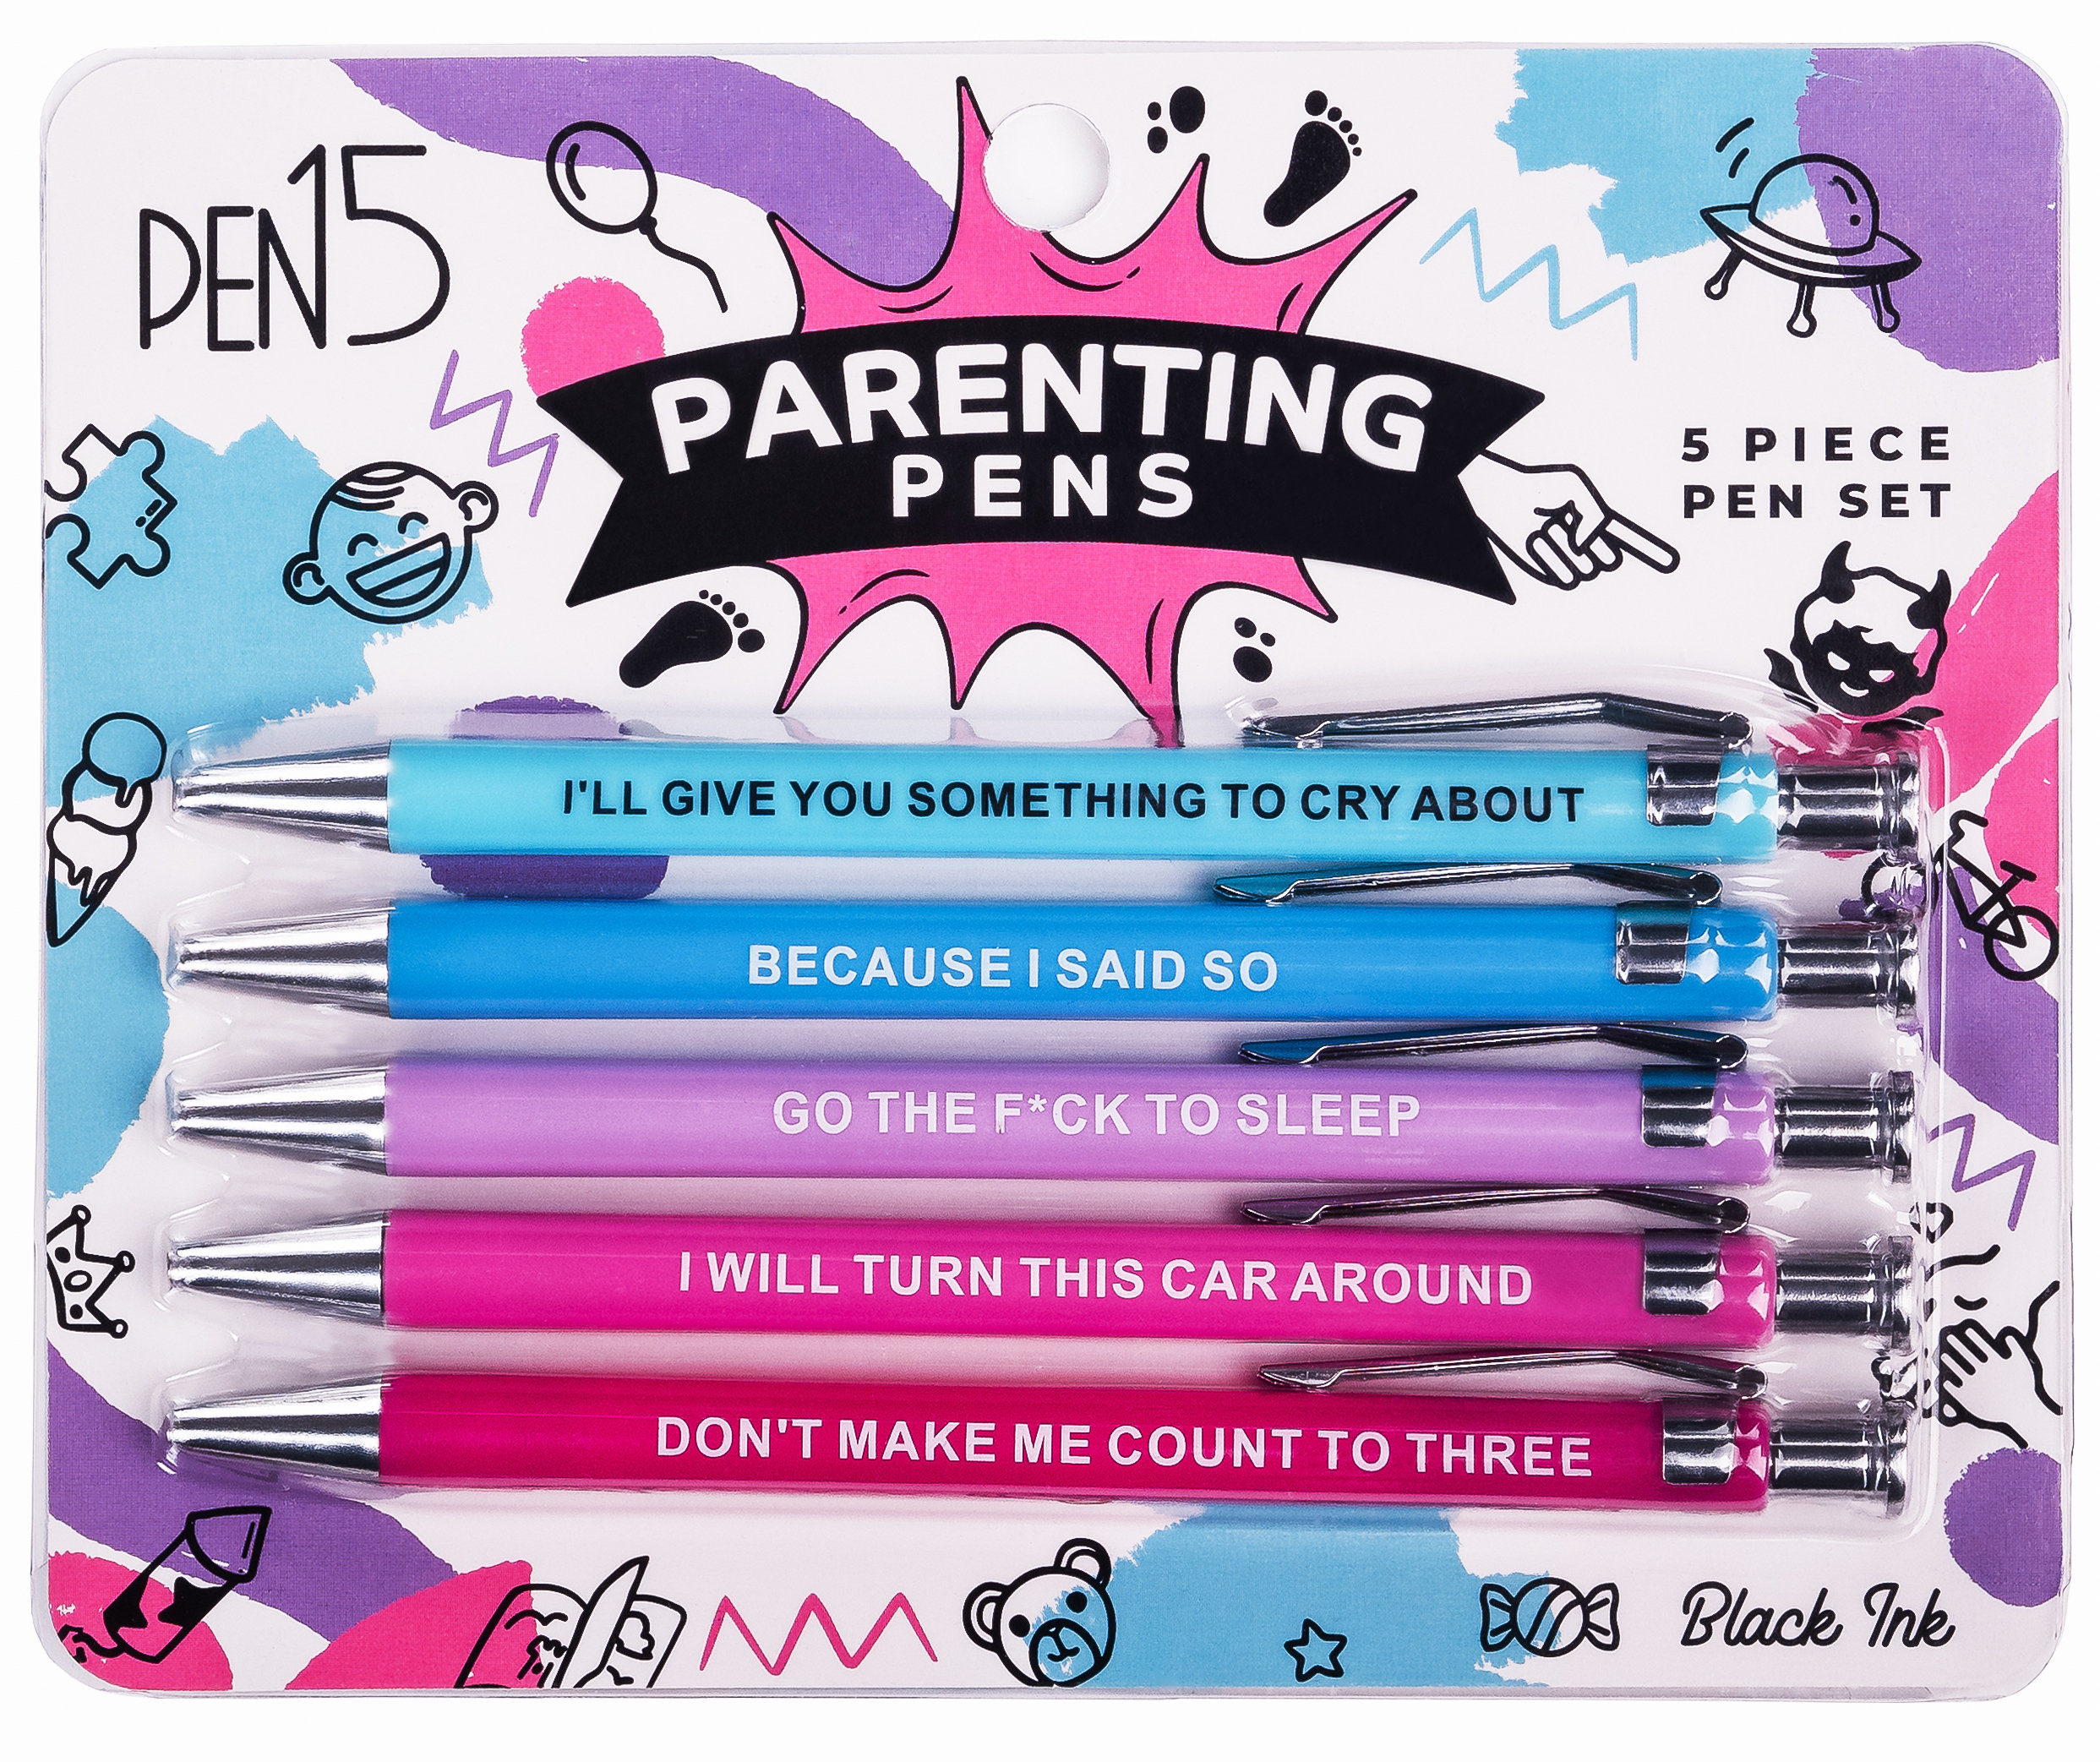 Offensive Pens, Funny Gag Gift, Funny Pen Set, Adult, Funny Pens, Gag Gift,  Stocking Stuffer, Christmas Holiday Gift, Funny Office Gift 